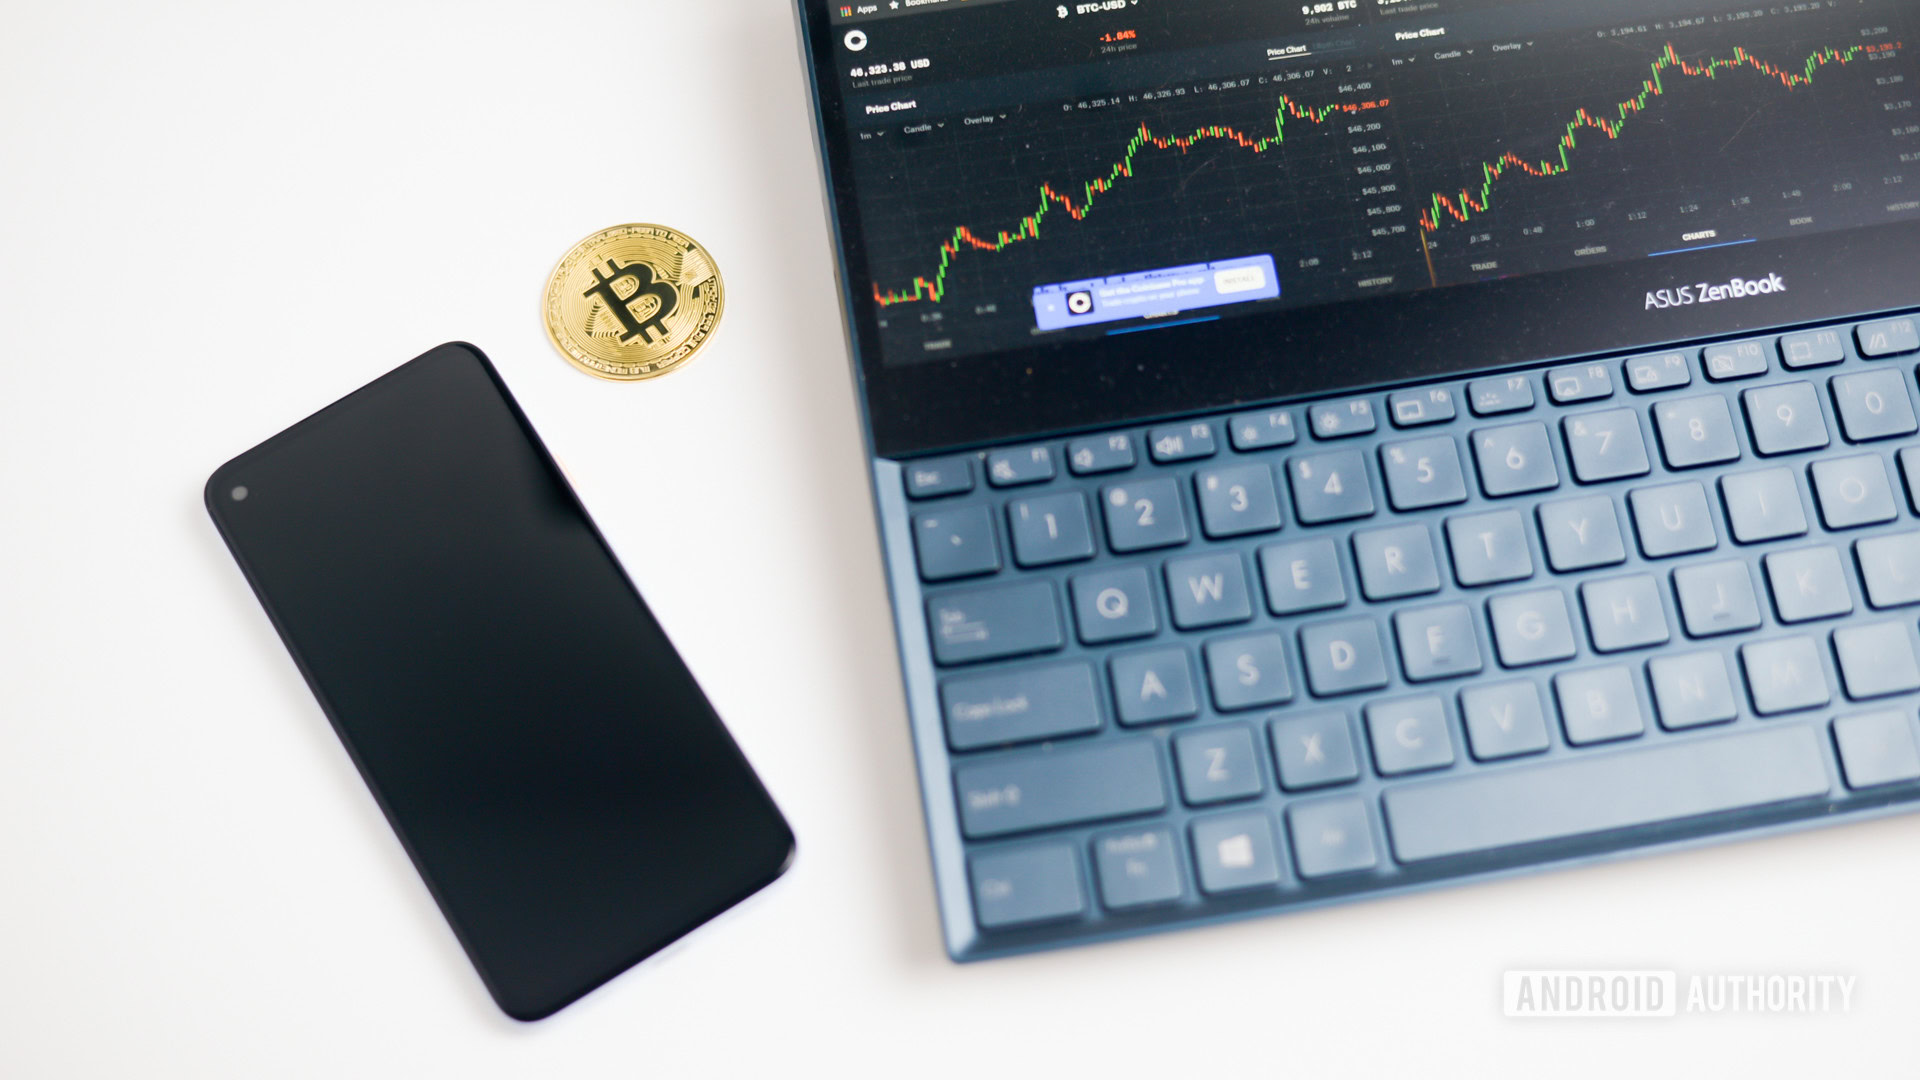 Bitcoin coin next to laptop with graphs stock image